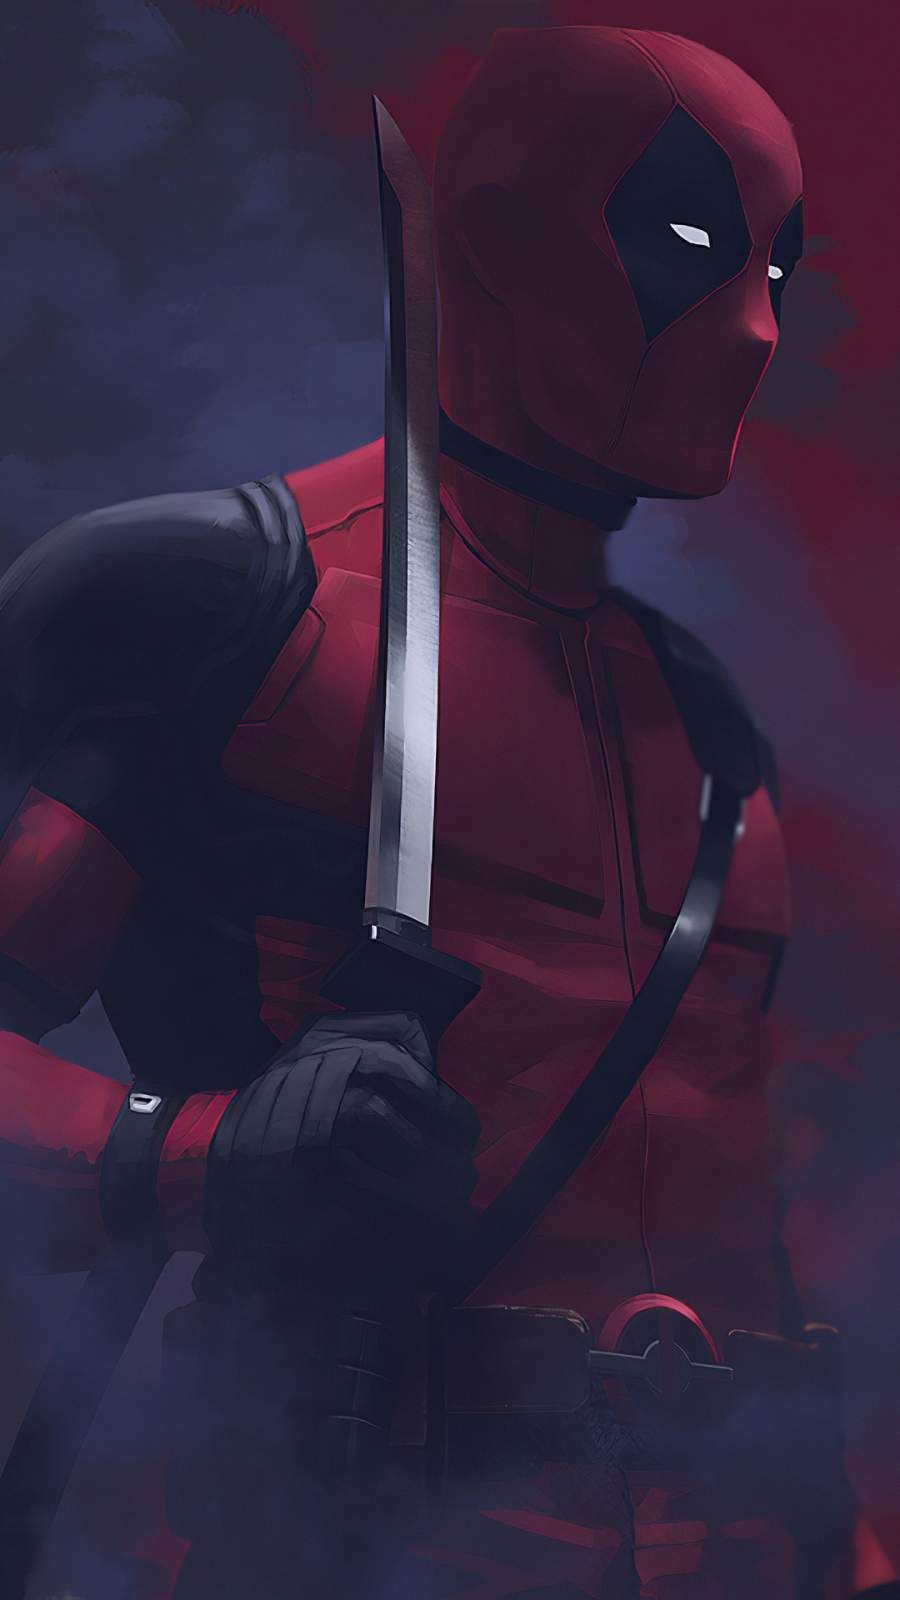 Download Deadpool Sword IPhone Wallpaper Top Free Awesome